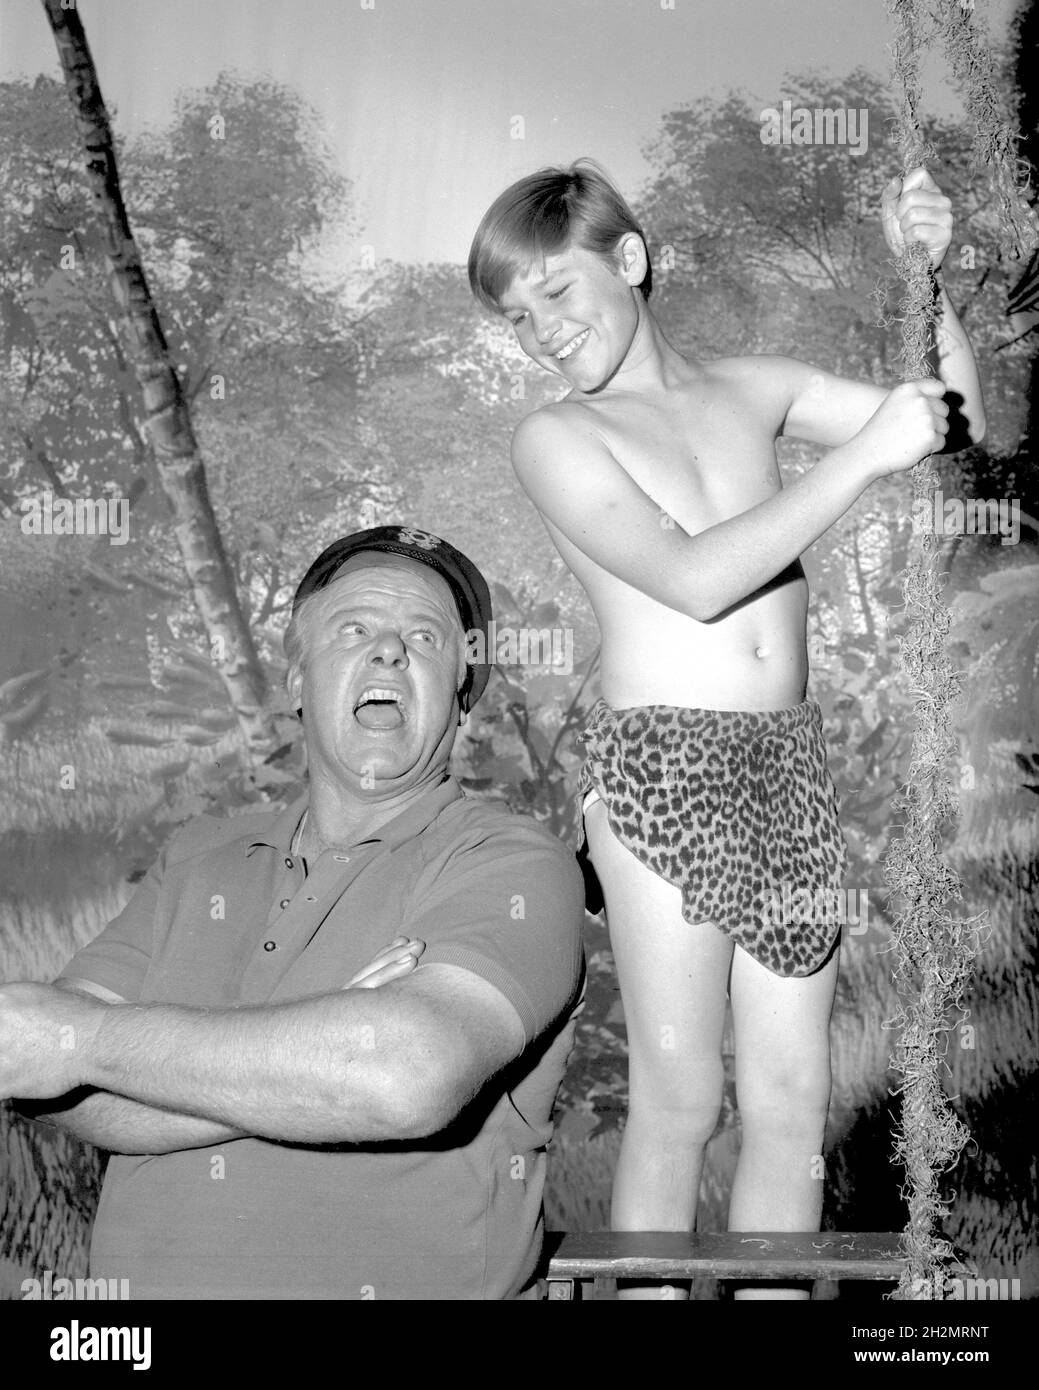 KURT RUSSELL and ALAN HALE JR. in GILLIGAN'S ISLAND (1964), directed by GARY NELSON, JACK ARNOLD, JERRY HOPPER and LESLIE GOODWINS. Credit: United Artists Television / Album Stock Photo